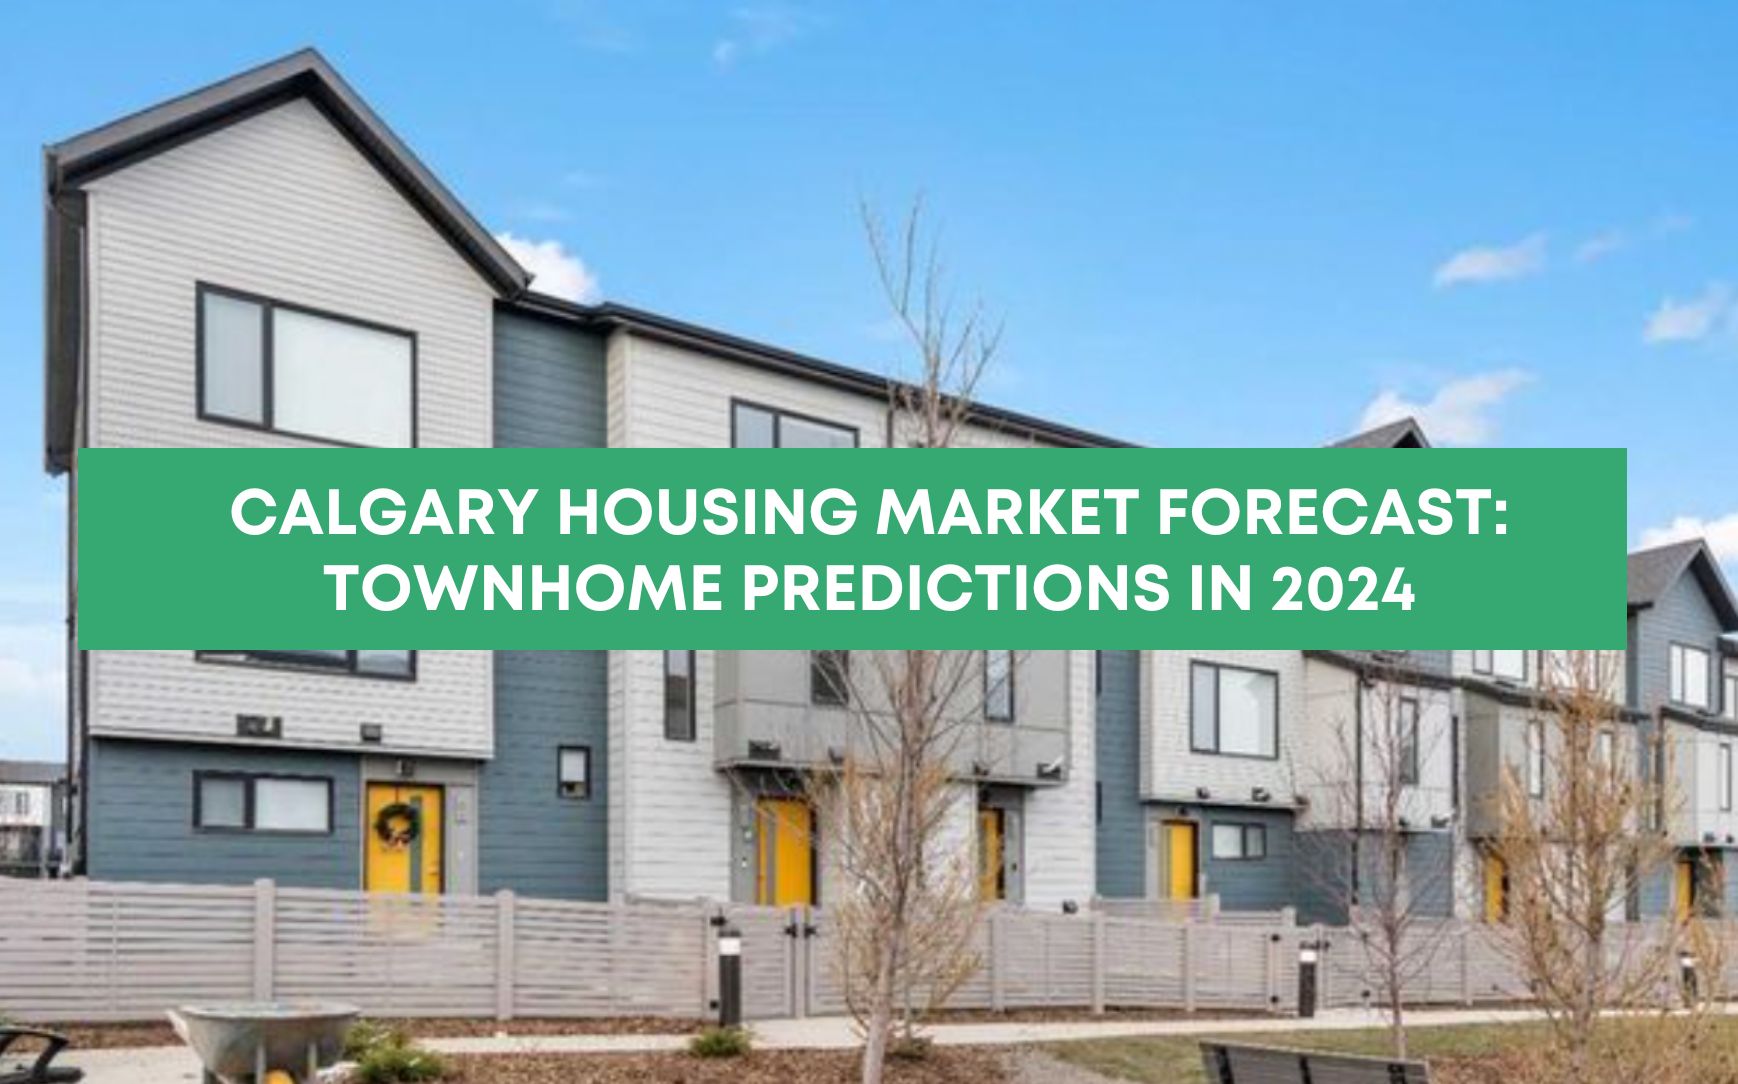 Calgary Housing Market Report Townhomes Forecast for 2024